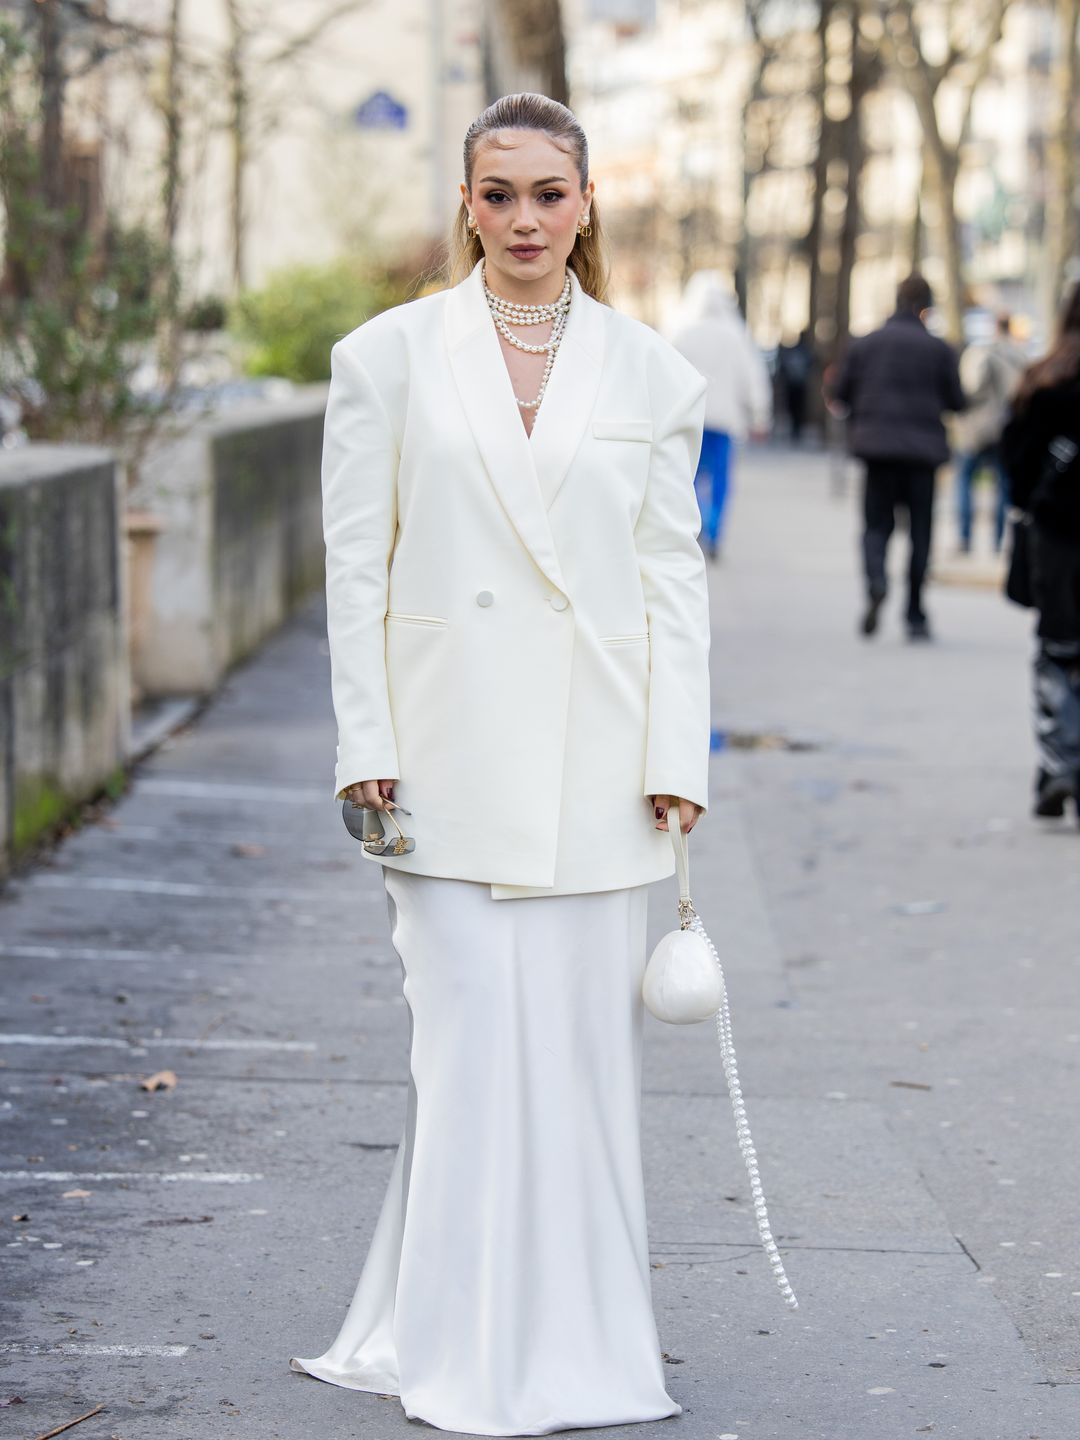 Influencer is wearing a long white dress with a white blazer and pearlescent bag